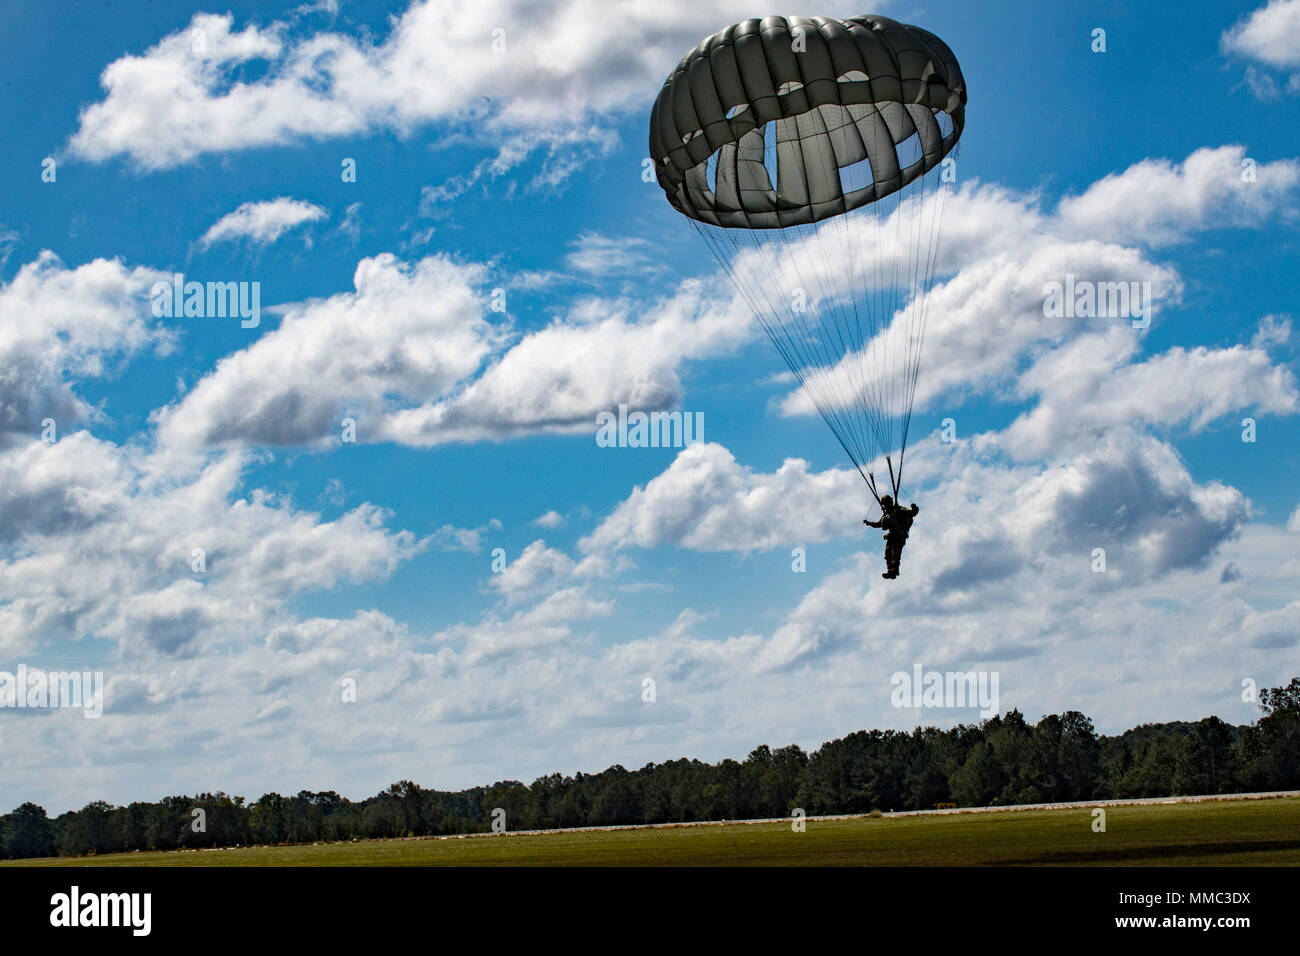 A member of the 820th Base Defense Group (BDG) descends during a static-line jump, Oct. 3, 2017, at the Lee Fulp drop zone in Tifton, Ga. The 820th Combat Operations Squadron’s four-person shop of parachute riggers are responsible for ensuring every 820th BDG parachute is serviceable, while also ensuring ground safety at the drop zone. The team has packed and inspected more than 490 parachutes in 2017. (U.S. Air Force photo by Airman 1st Class Daniel Snider) Stock Photo